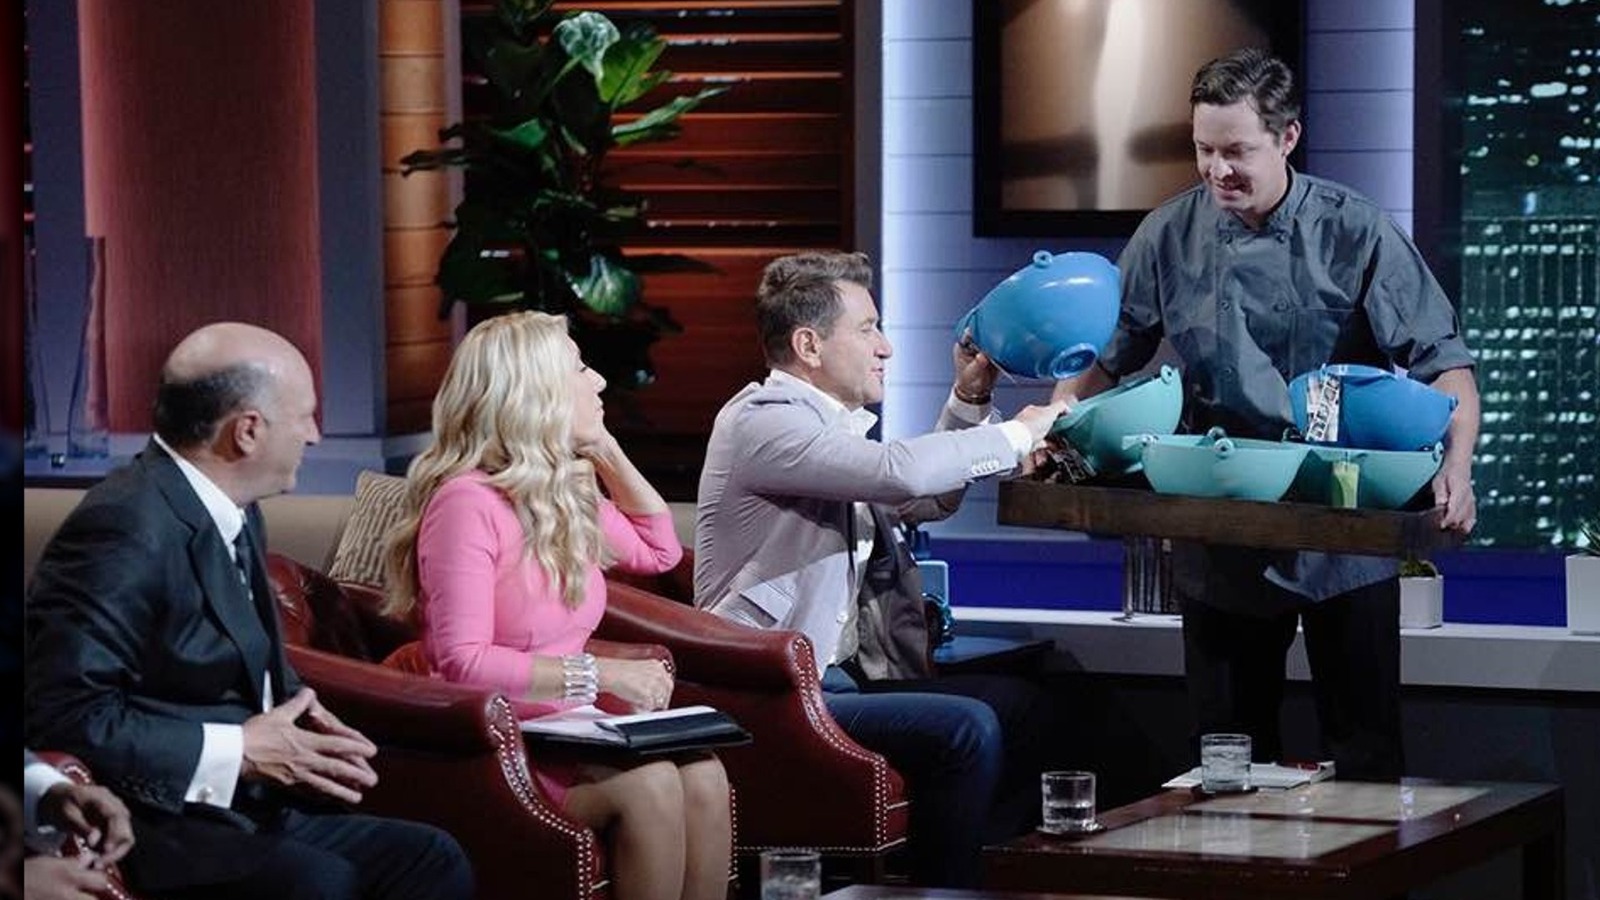 https://www.mashed.com/img/gallery/what-happened-to-peoples-design-scooping-bowl-from-shark-tank/l-intro-1685542426.jpg